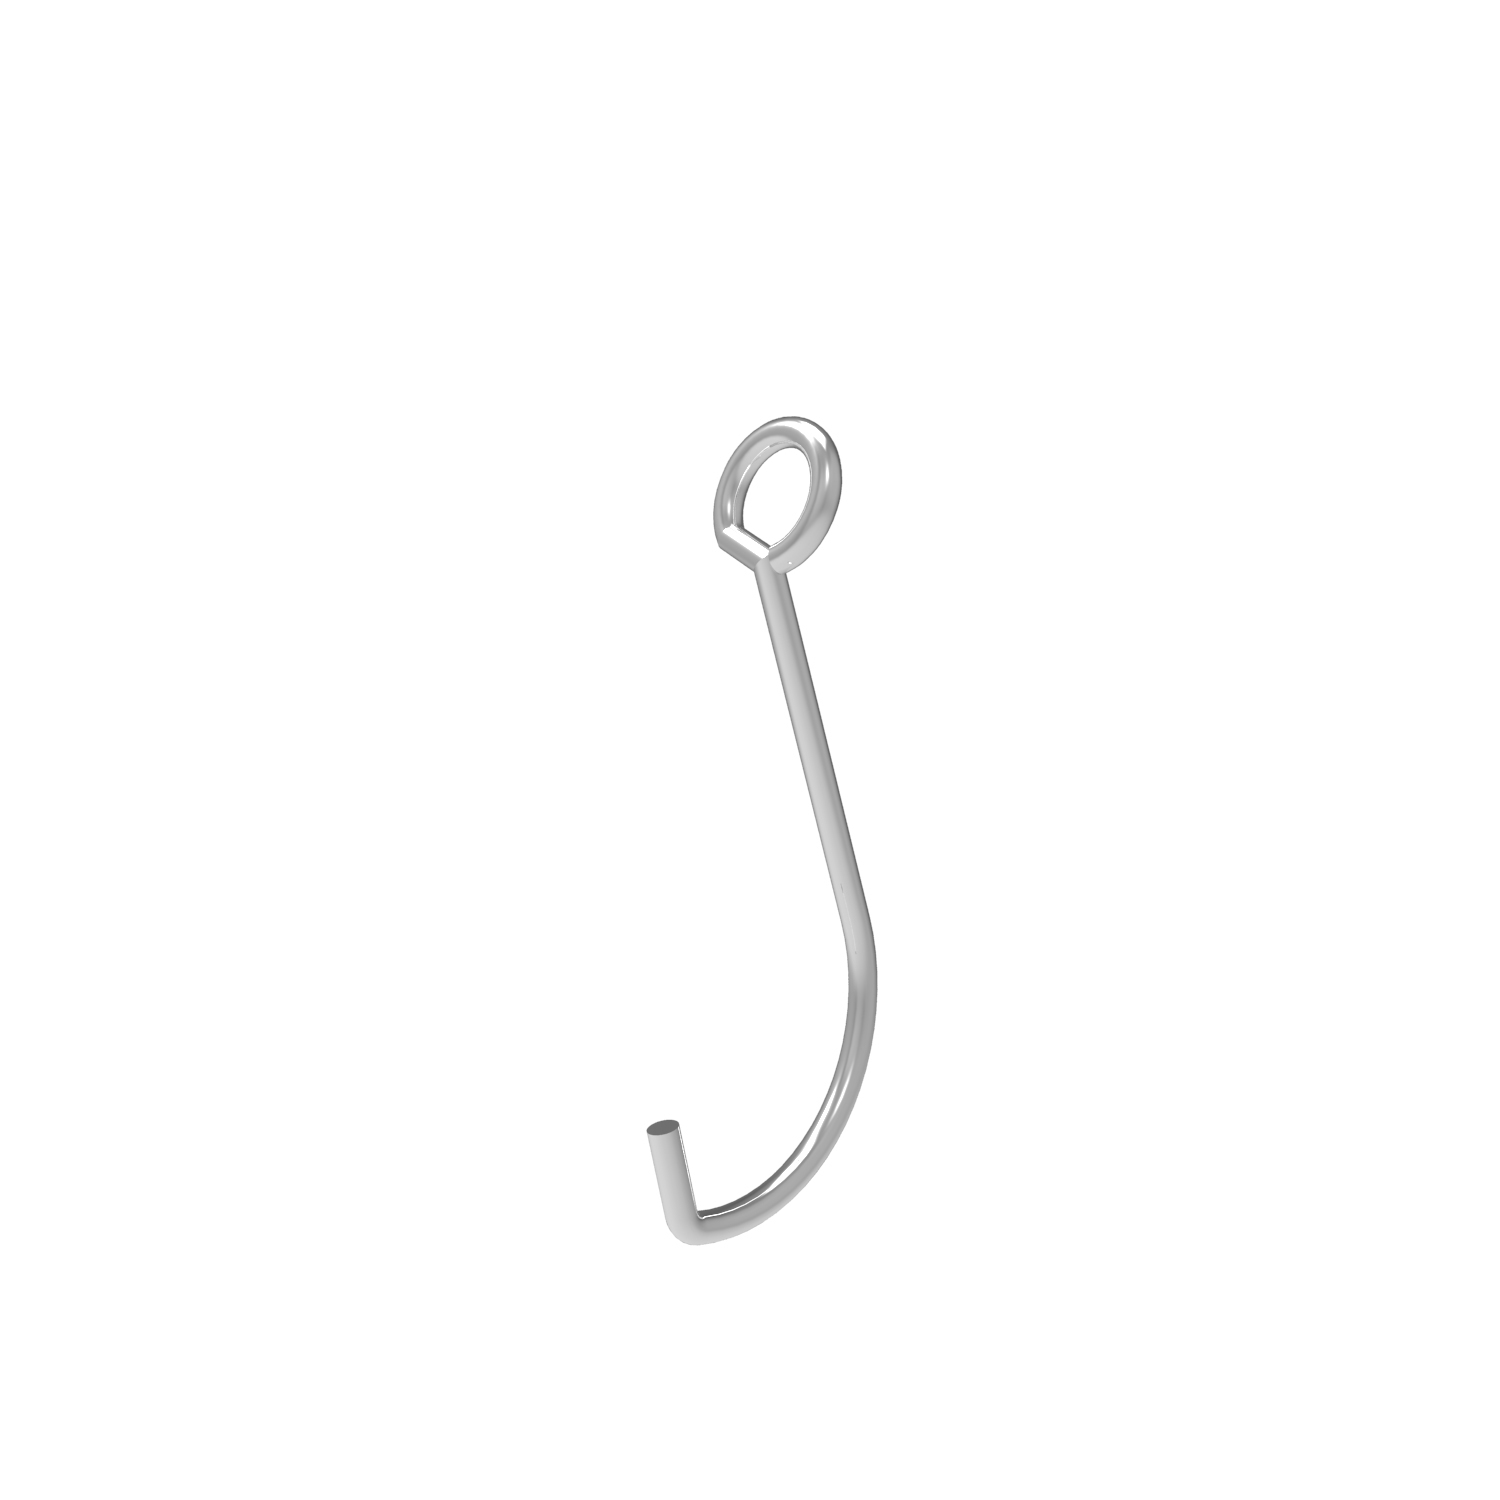 Retractor GOTOU-NAKAMURA 2 Nail-Hook Type Large, Surgical instruments